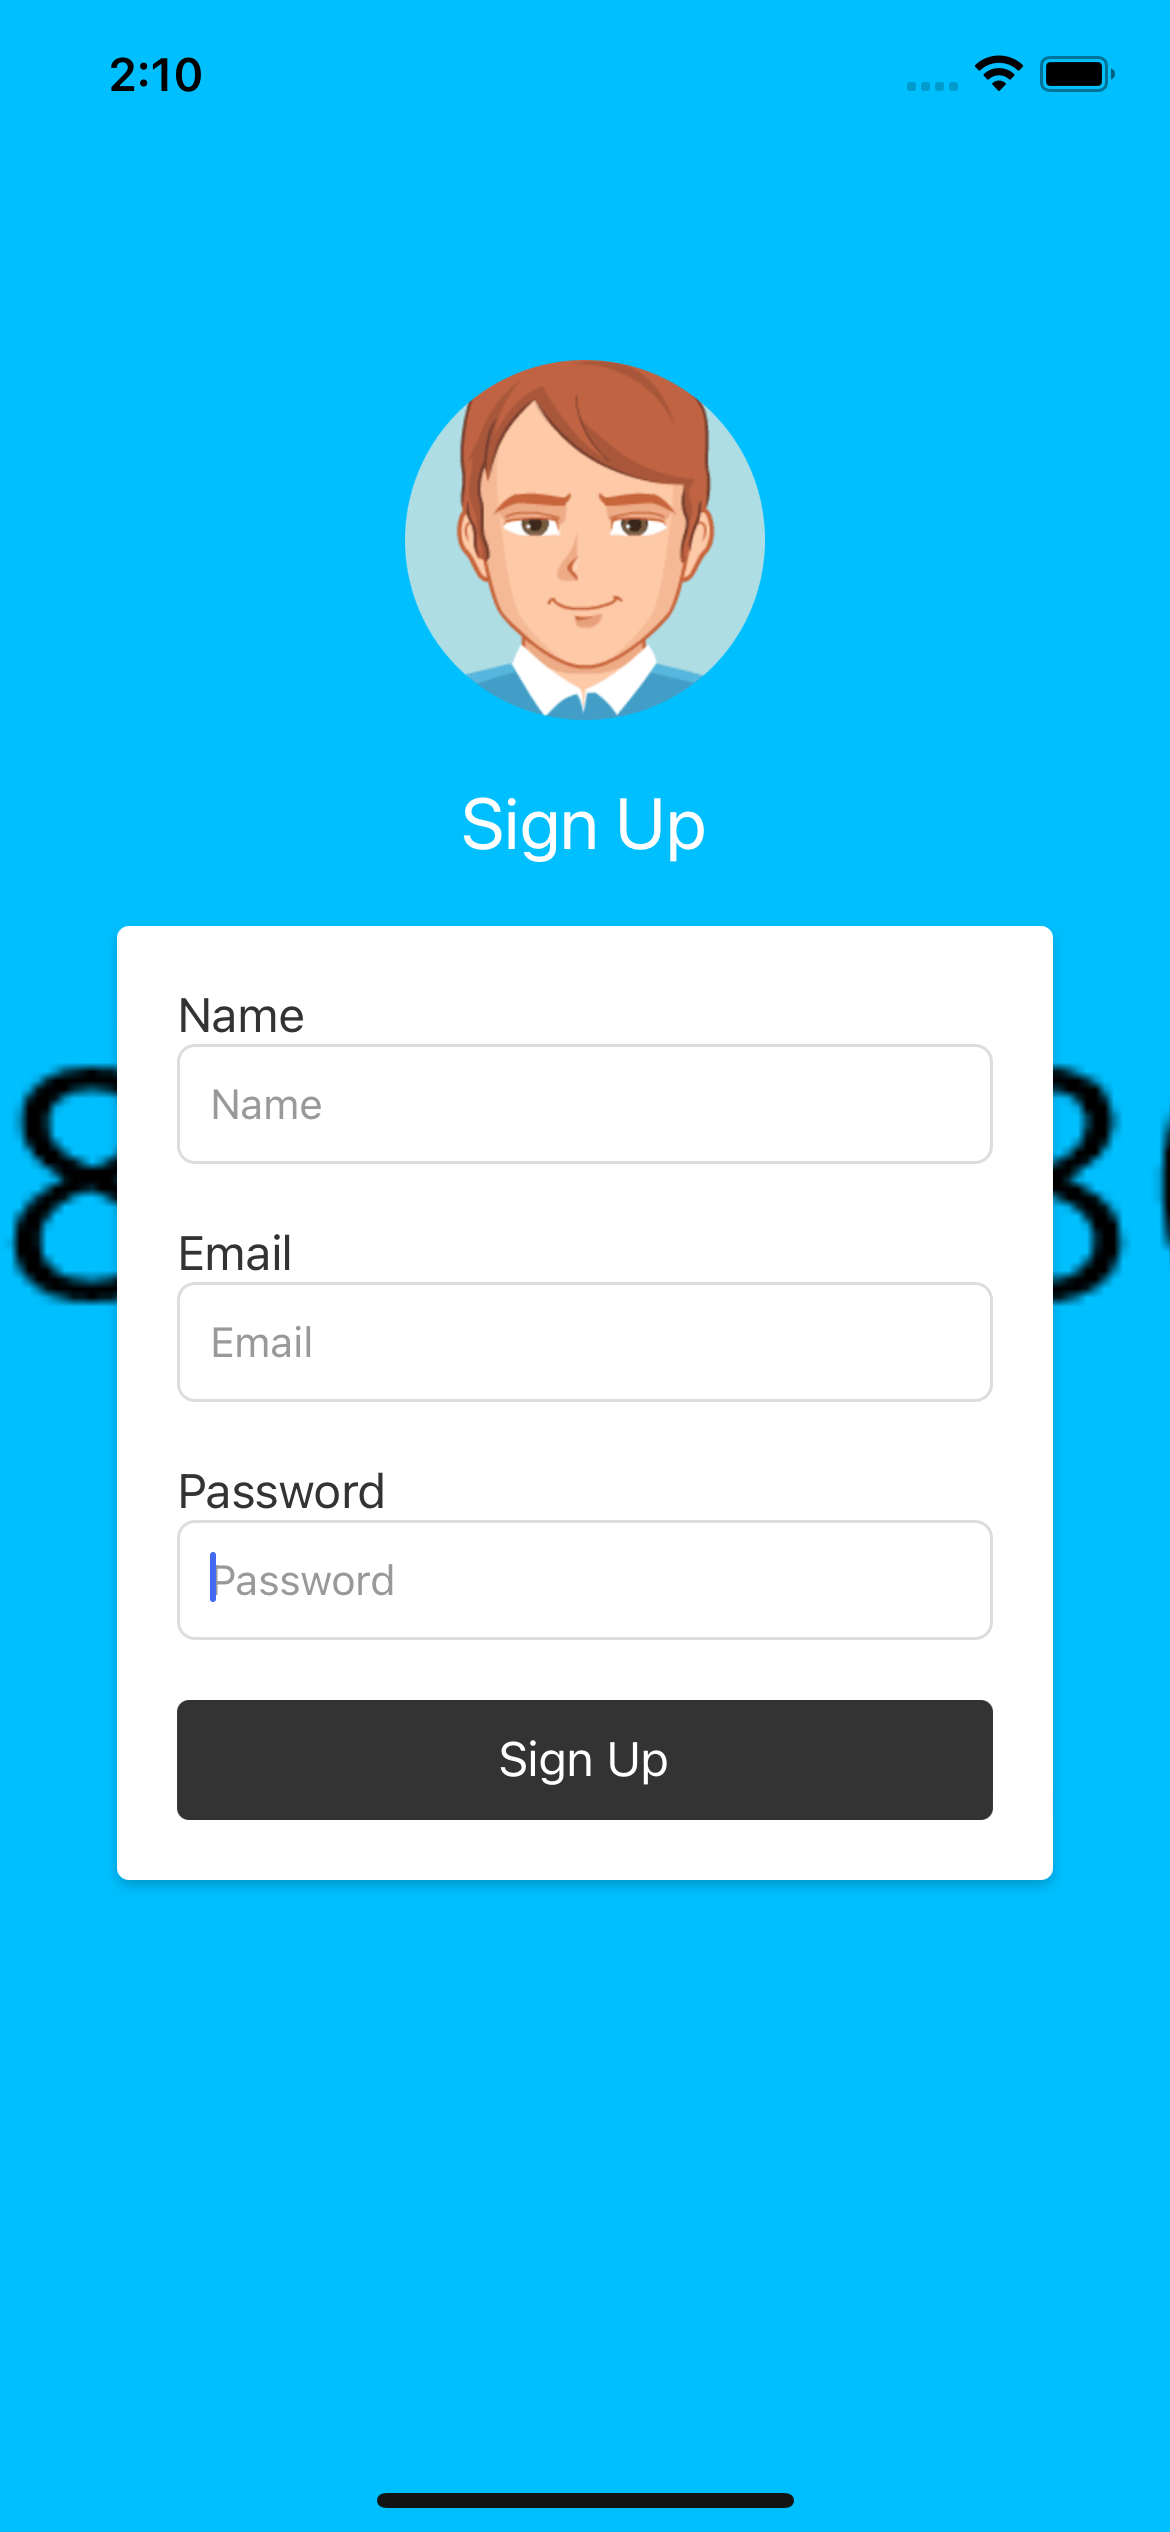 React native template. Sign up screen with background and logo